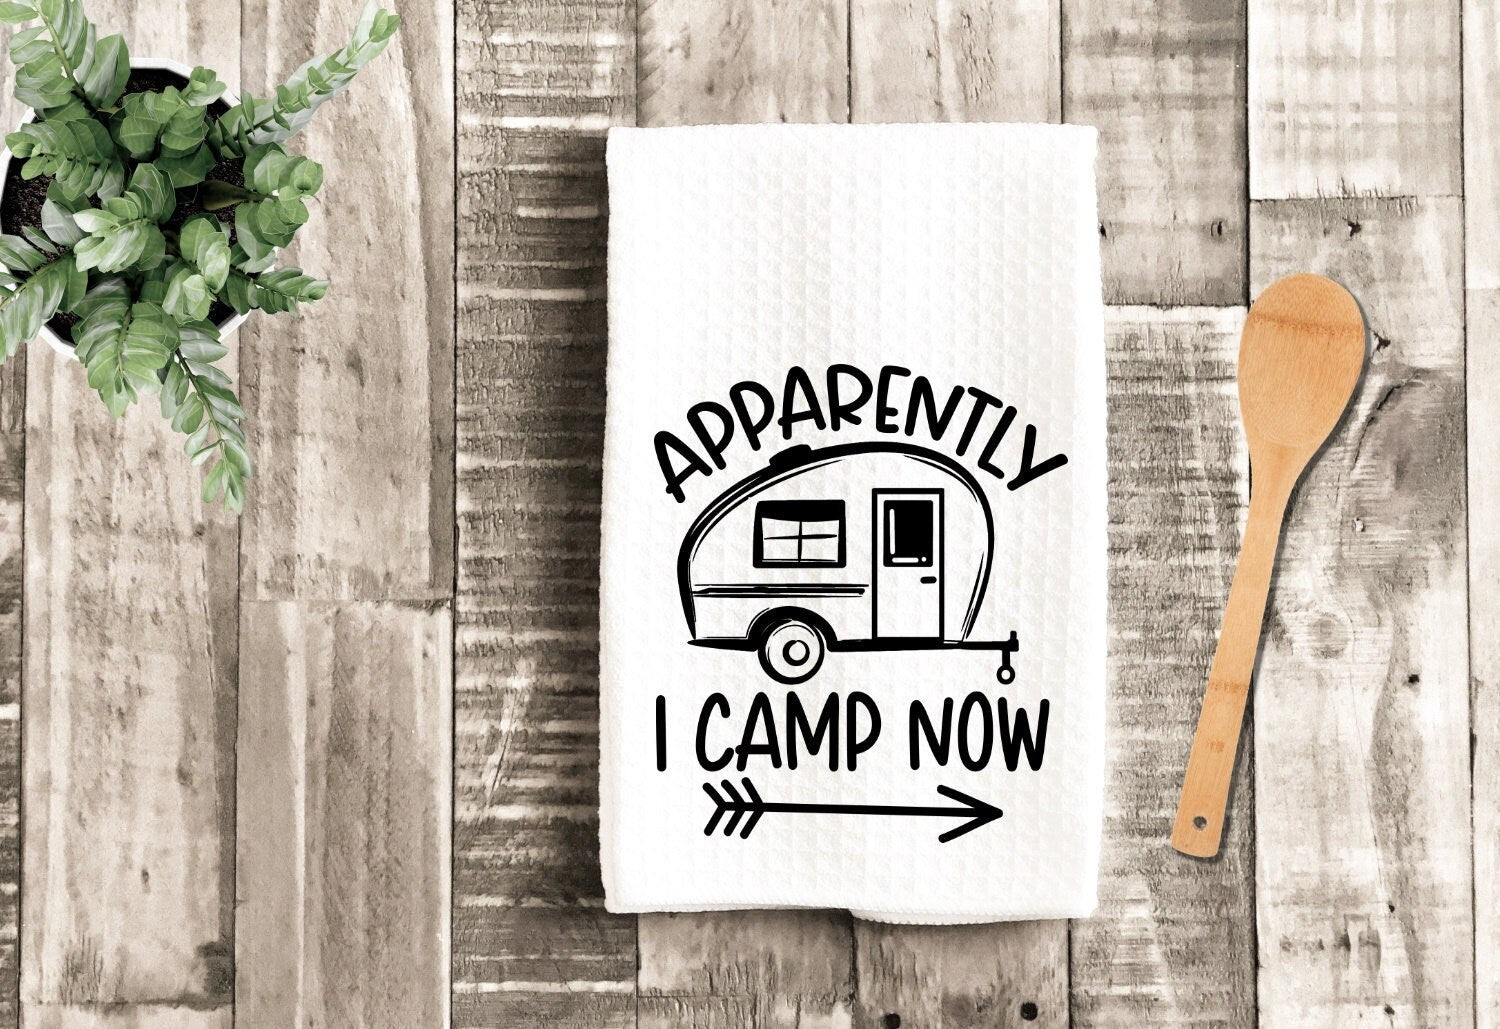 Apparently I Camp Now Funny Dish Towel - Tea Towel Camper Kitchen Deco –  Lazy Gator Tees